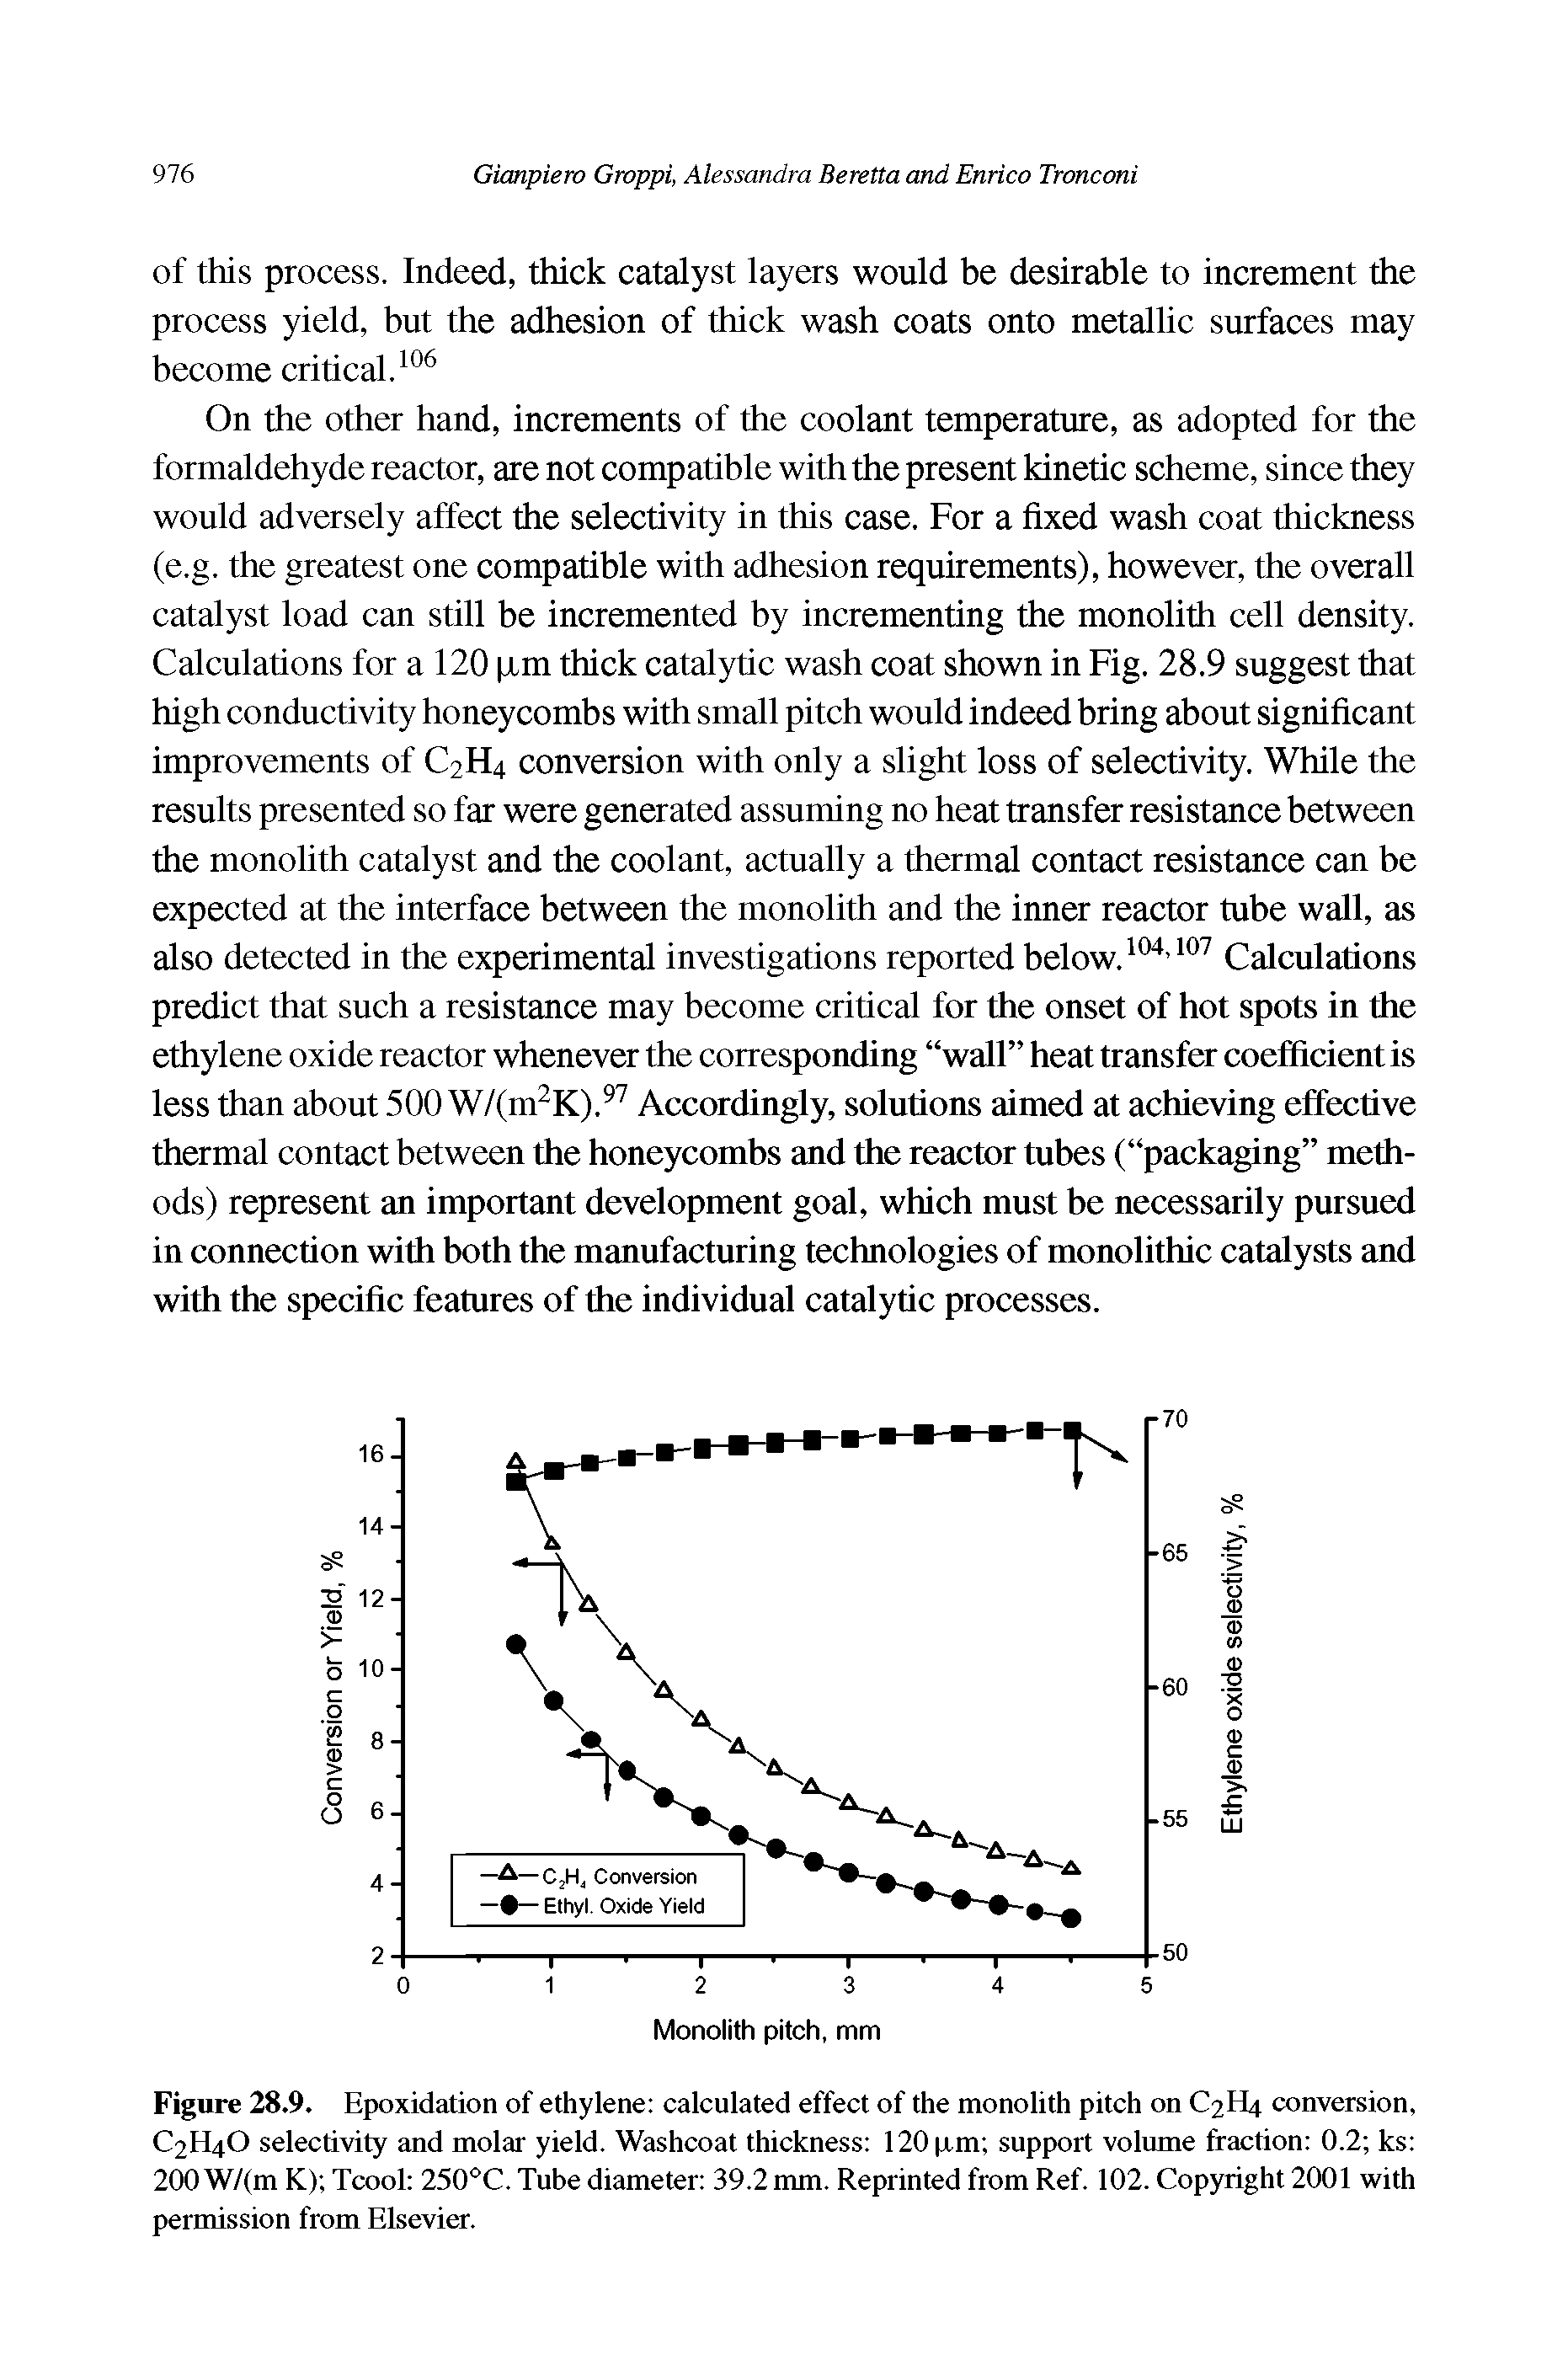 Figure 28.9. Epoxidation of ethylene calculated effect of the monolith pitch on C2H4 conversion, C2H4O selectivity and molar yield. Washcoat thickness 120 xm support volume fraction 0.2 ks 200 W/(m K) Tcool 250 C. Tube diameter 39.2 mm. Reprinted from Ref. 102. Copyright 2001 with permission from Elsevier.